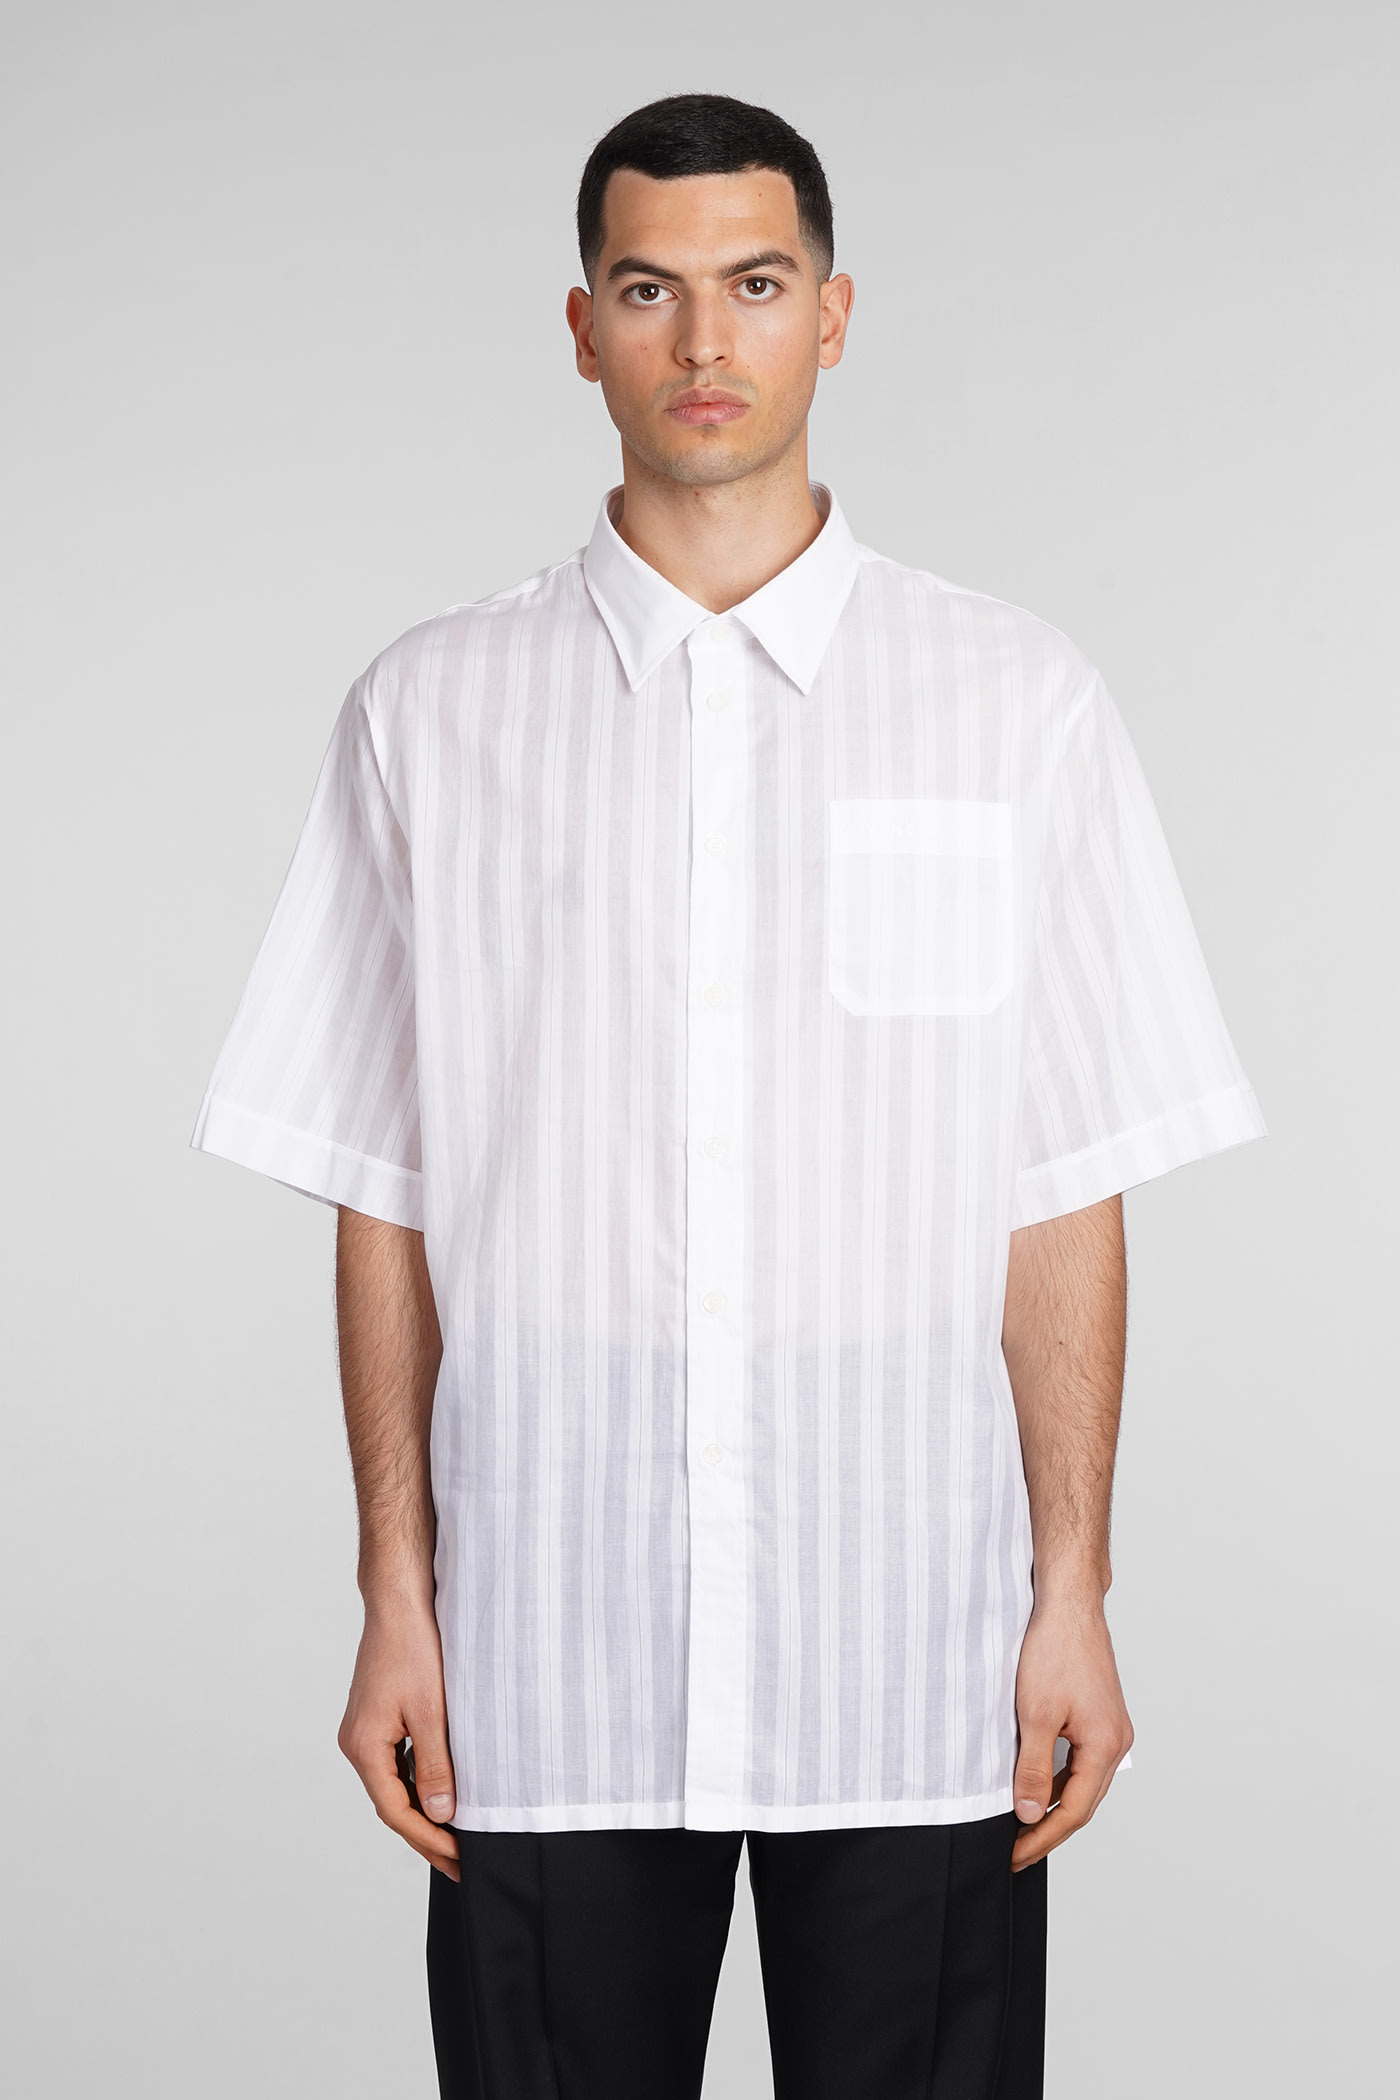 Givenchy Shirt In White Cotton